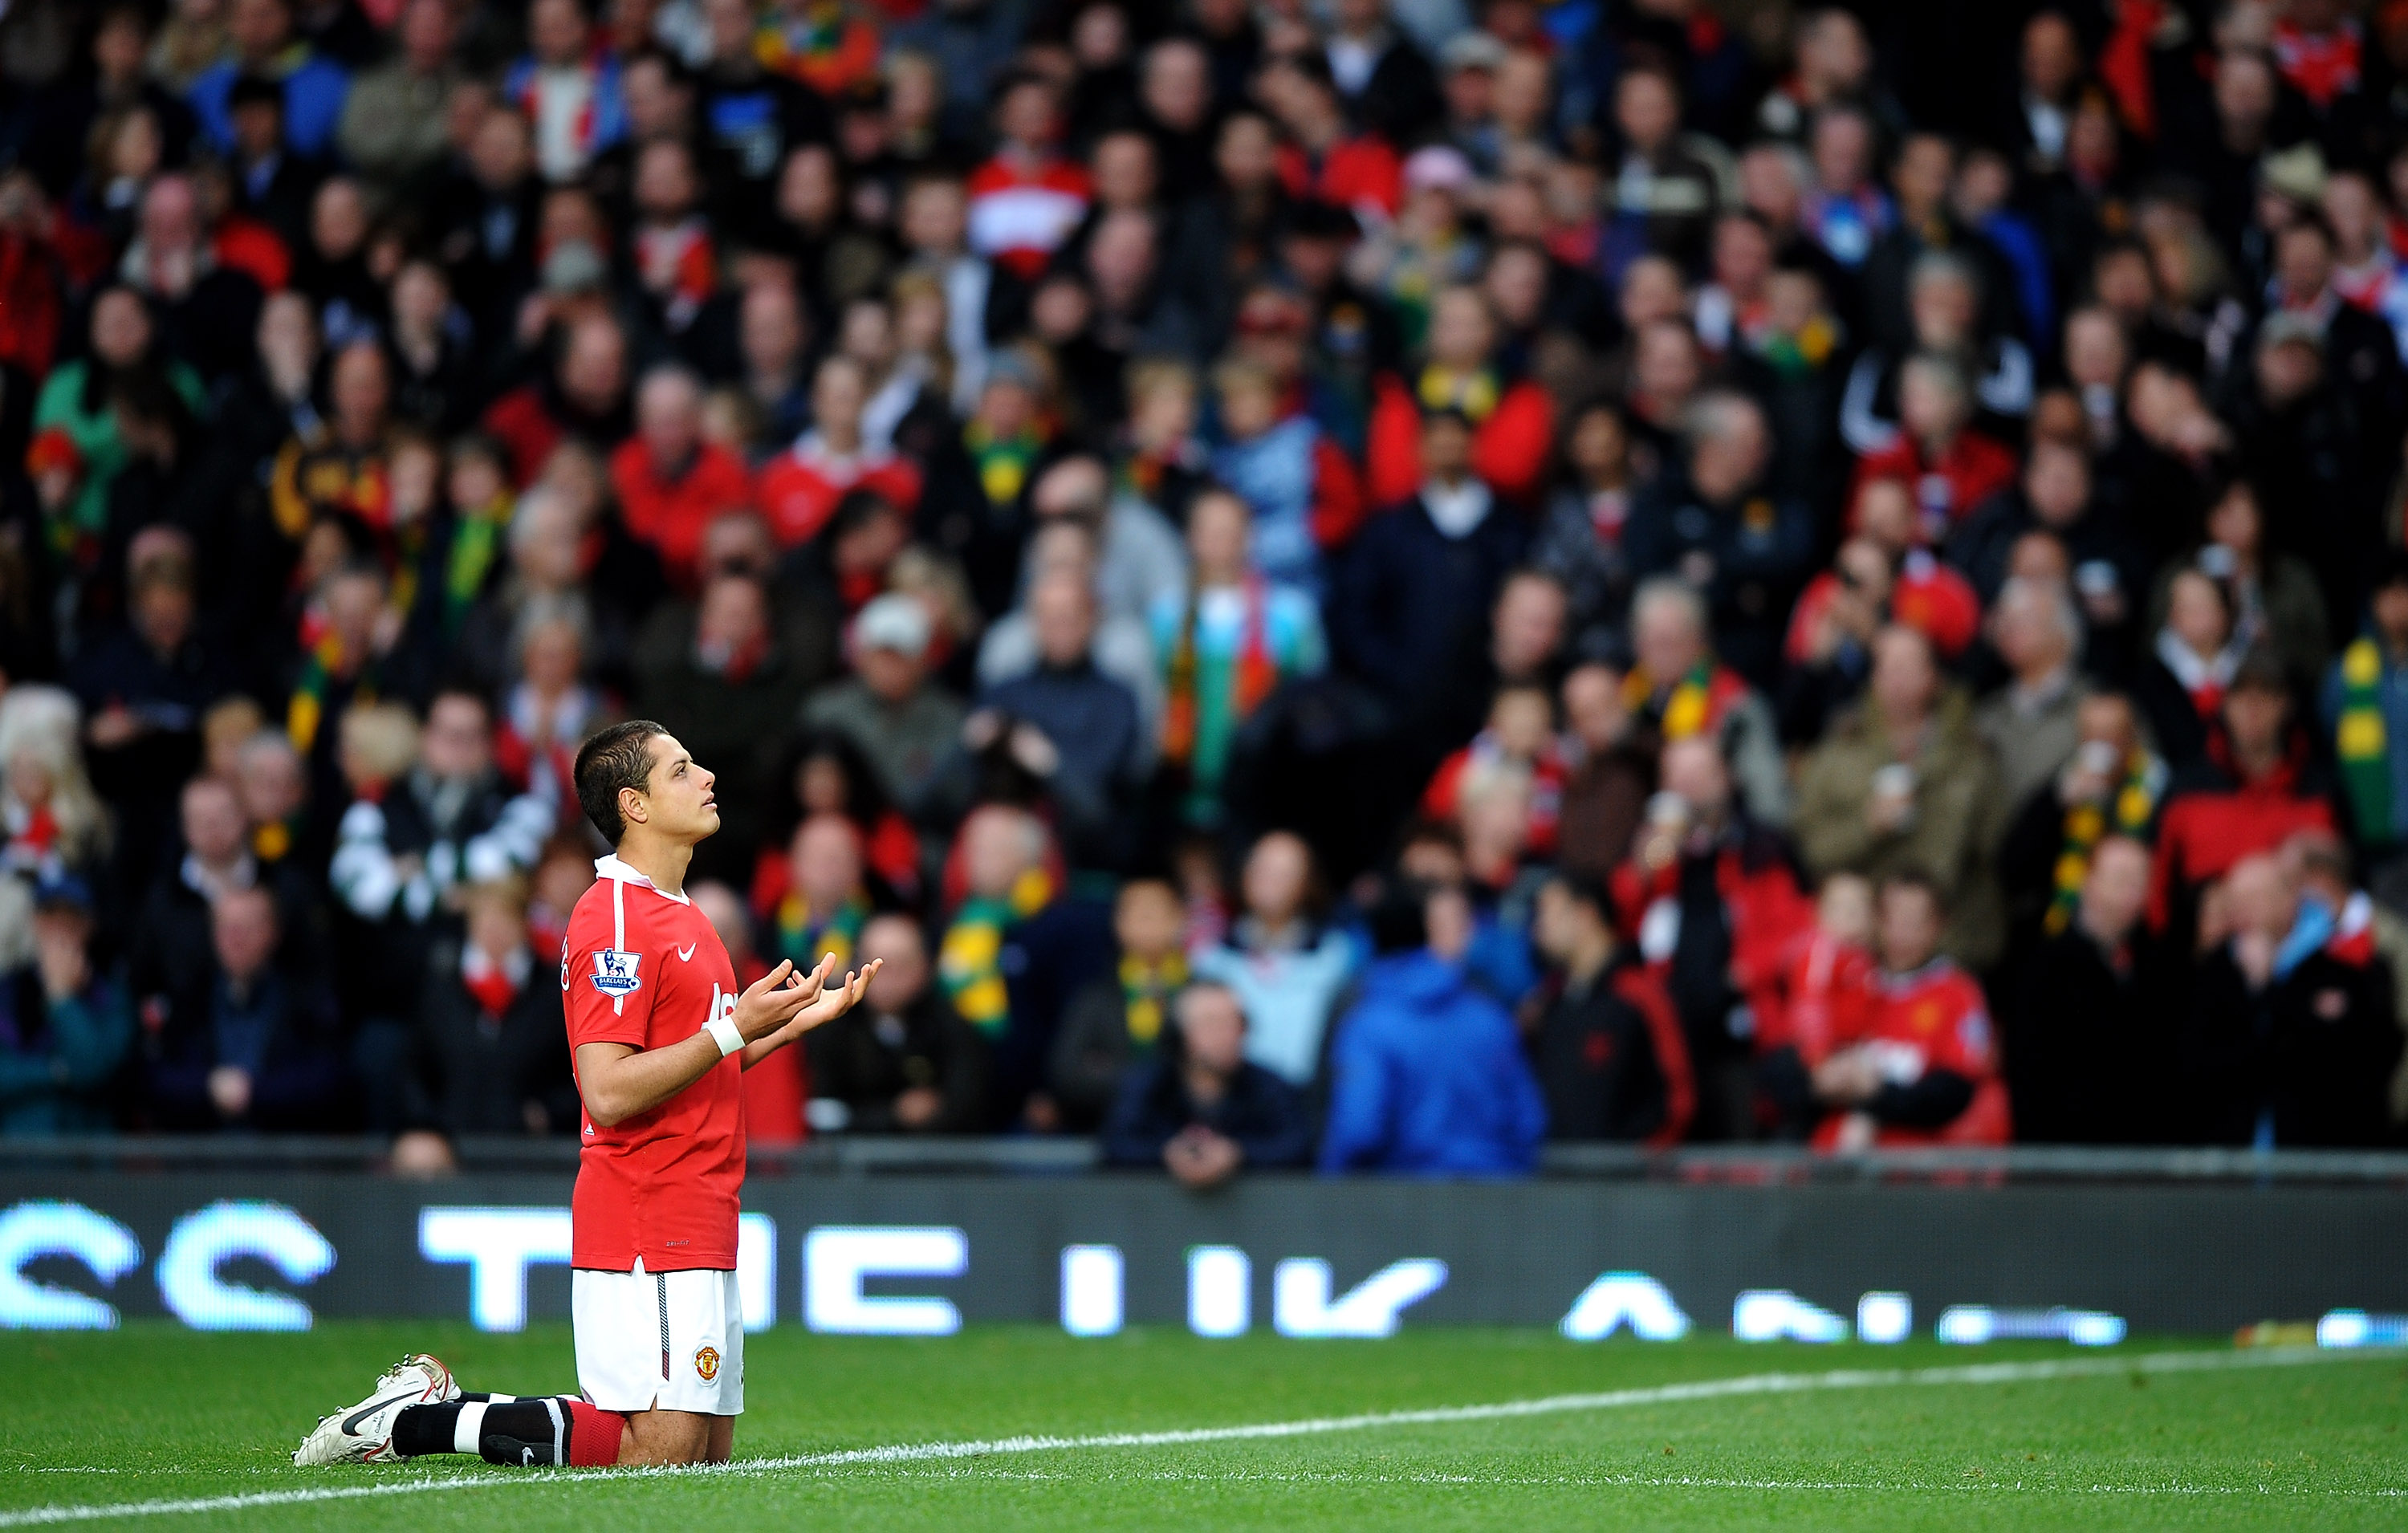 MANCHESTER, ENGLAND - NOVEMBER 06:  Javier Hernandez of Manchester United says a prayer prior to the Barclays Premier League match between Manchester United and Wolverhampton Wanderers at Old Trafford on November 6, 2010 in Manchester, England.  (Photo by